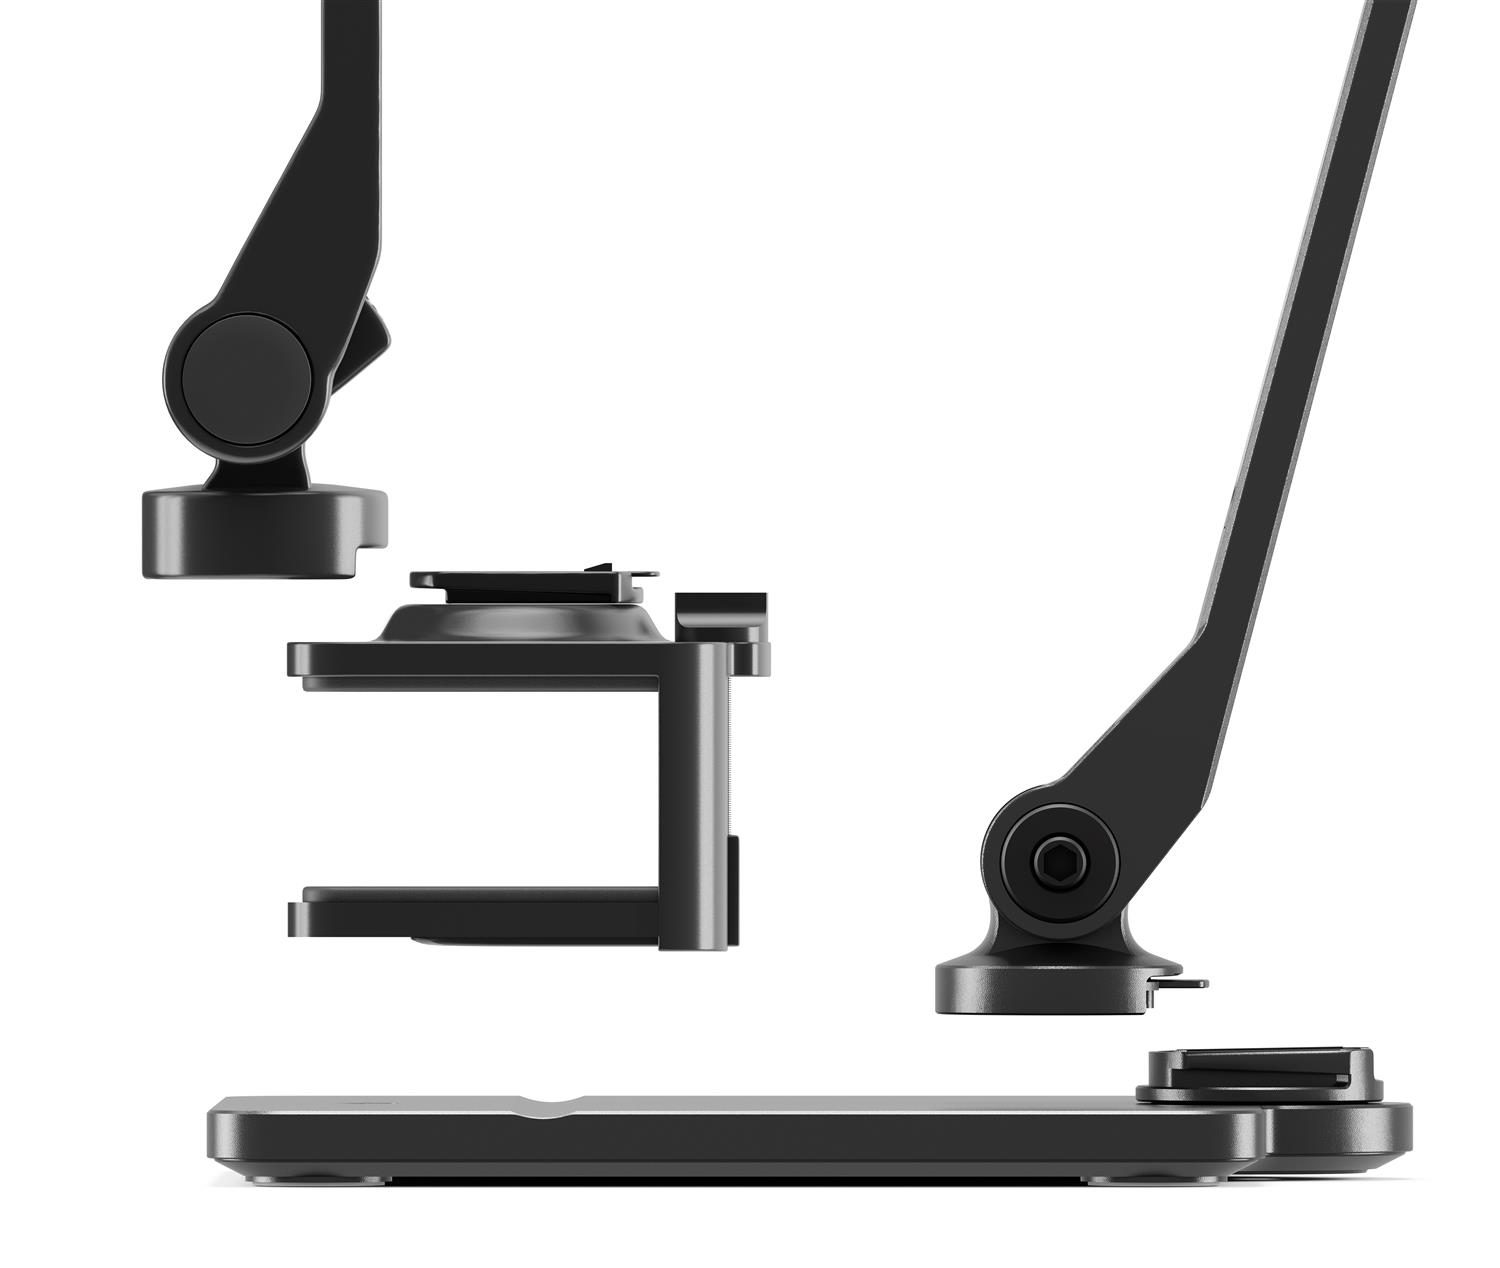 Twelve South HoverBar Duo with Snap adjustable holder for iPad, tablets - Black